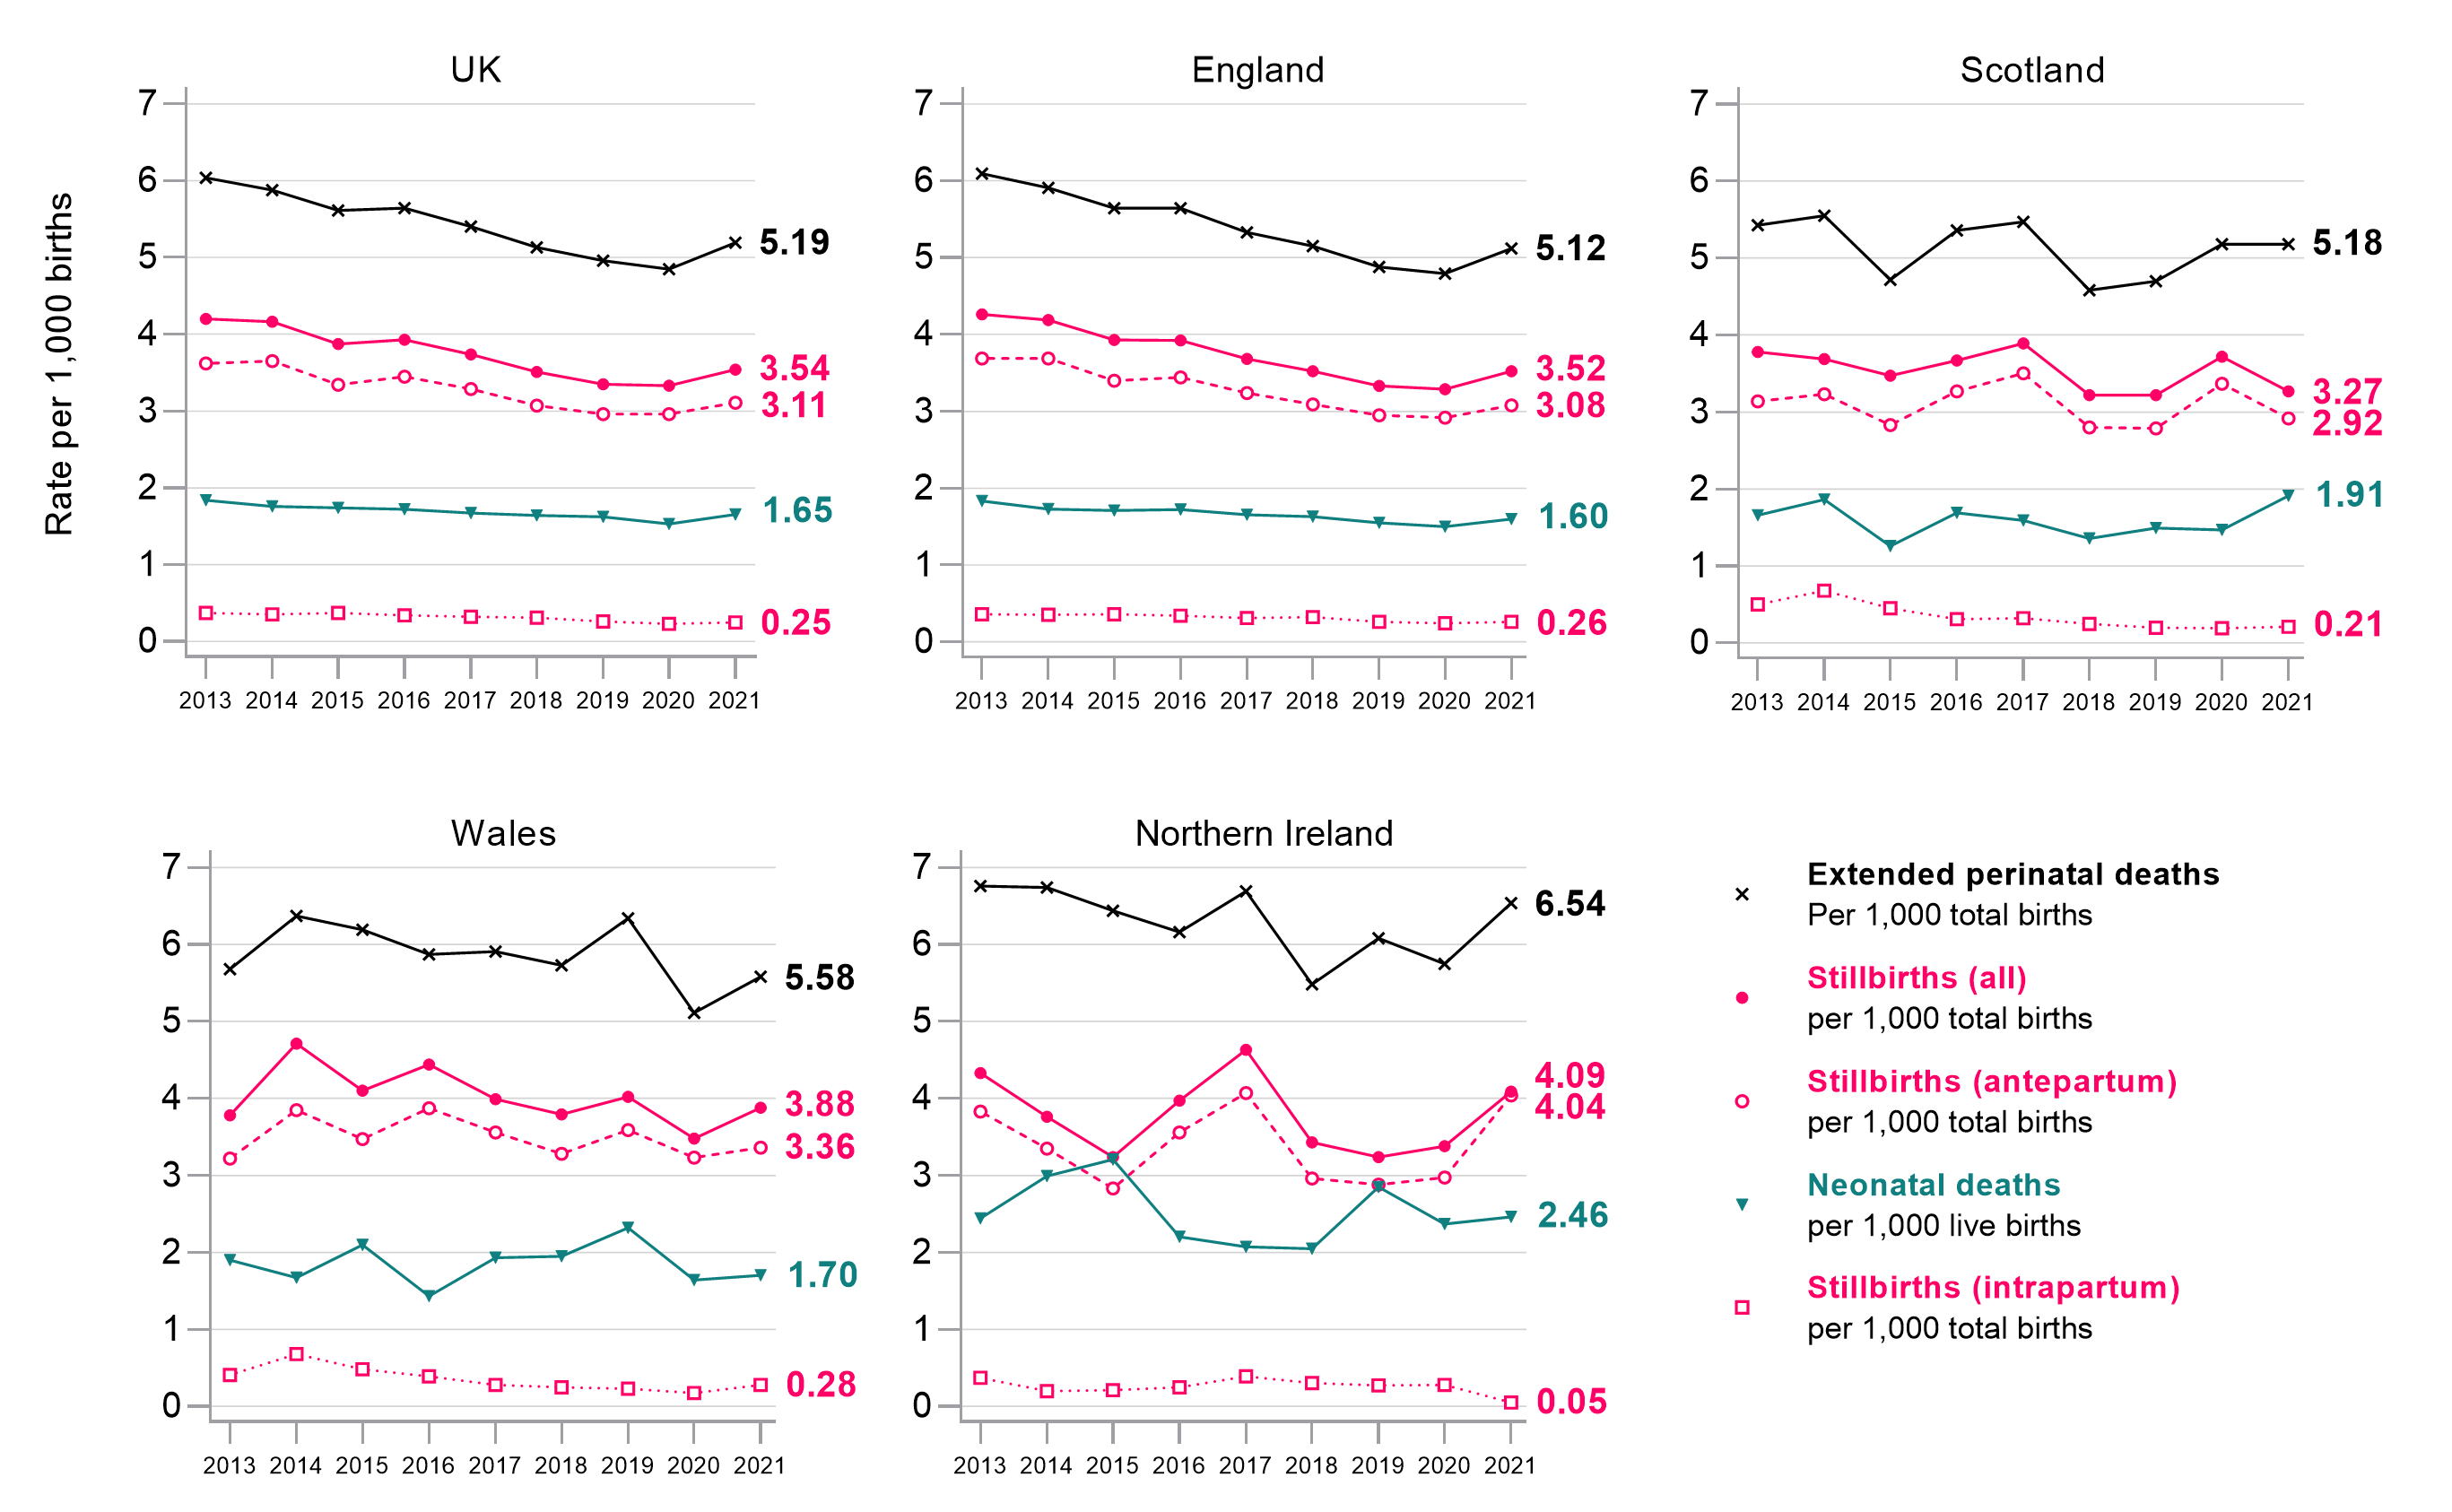 Figure 1: Line charts showing stillbirth (all, antepartum and intrapartum), neonatal death and extended perinatal mortality rates for the UK, England, Scotland, Wales and Northern Ireland, from 2013 to 2021